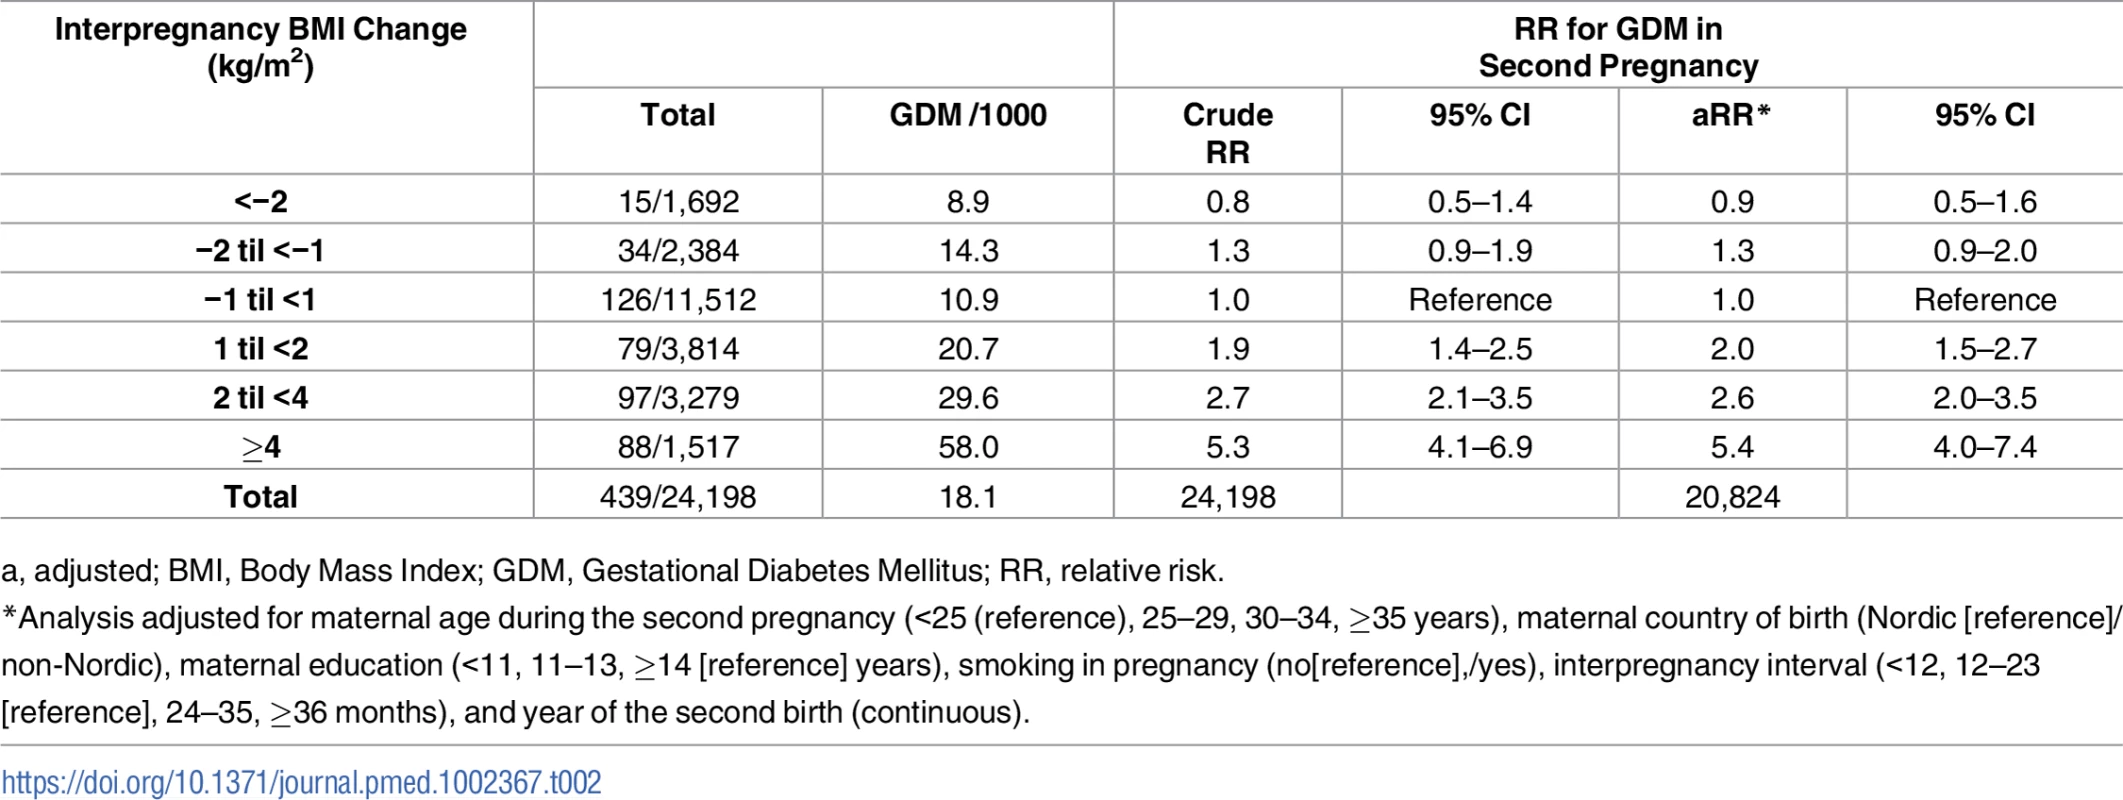 Overall risk for GDM in second pregnancy by interpregnancy change in BMI (<i>n</i> = 24,198), The Medical Birth Registry of Norway 2006–2014.